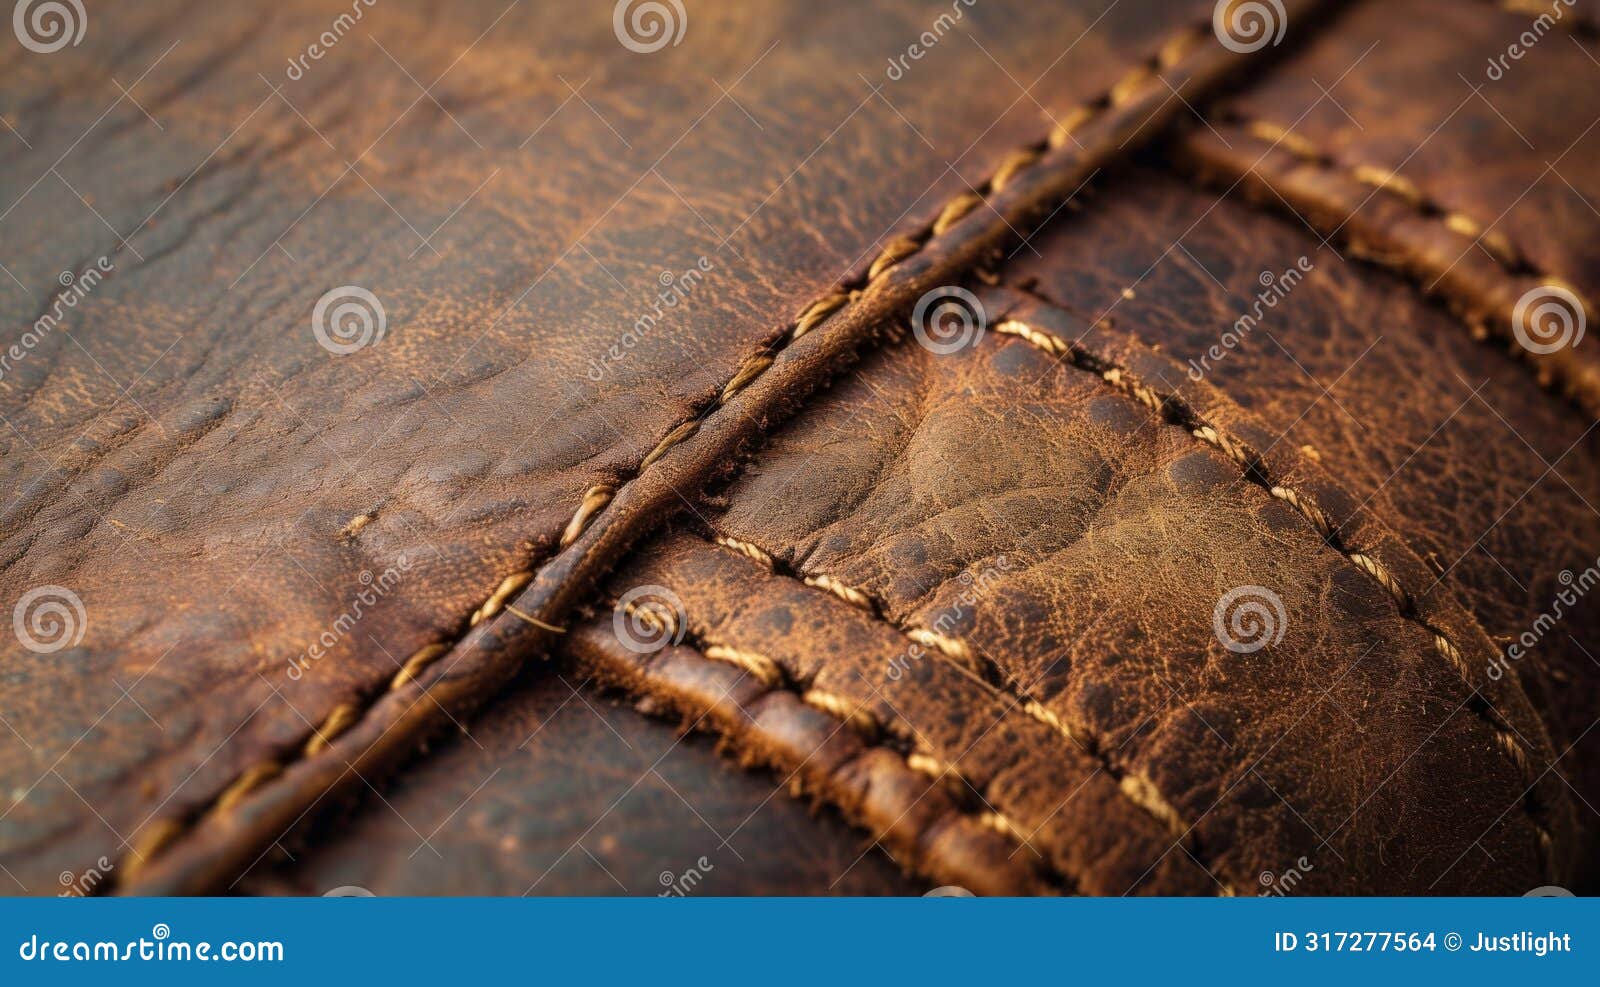 detail of aged leather revealing the gradual fading of color and the emergence of a rugged patina